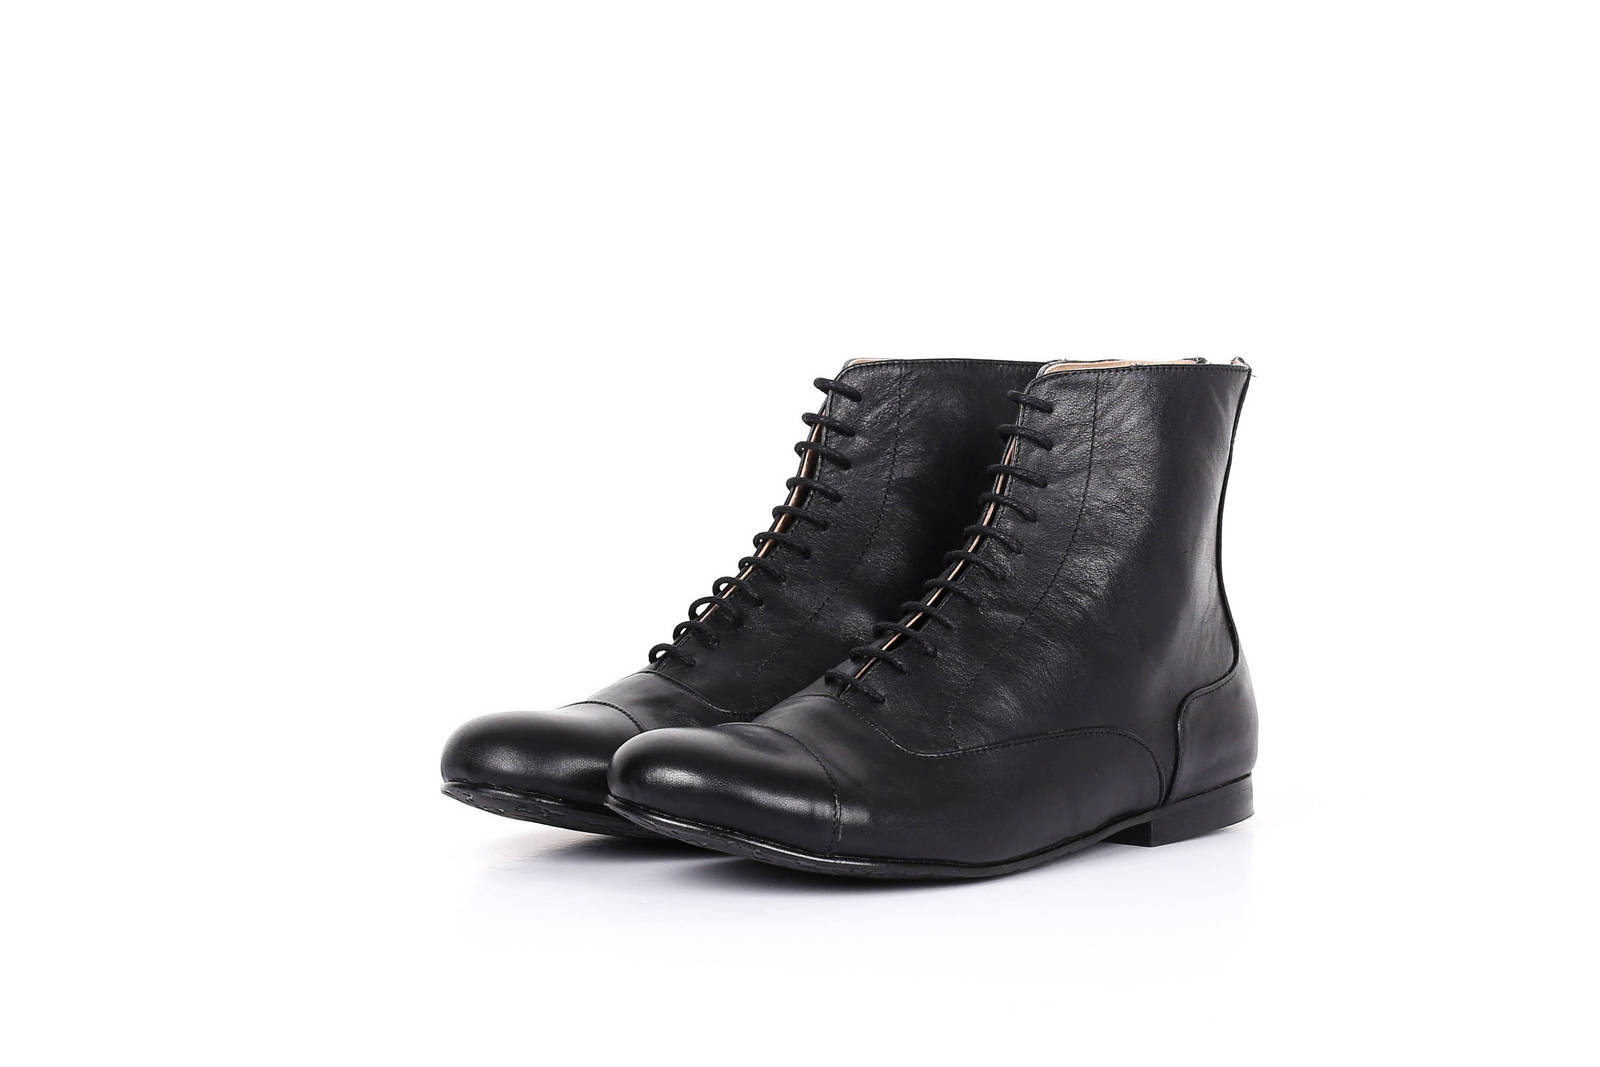 Women's New Black Derby Cap Toe Lace Up Vintage Leather Formal Dress Ankle Boot